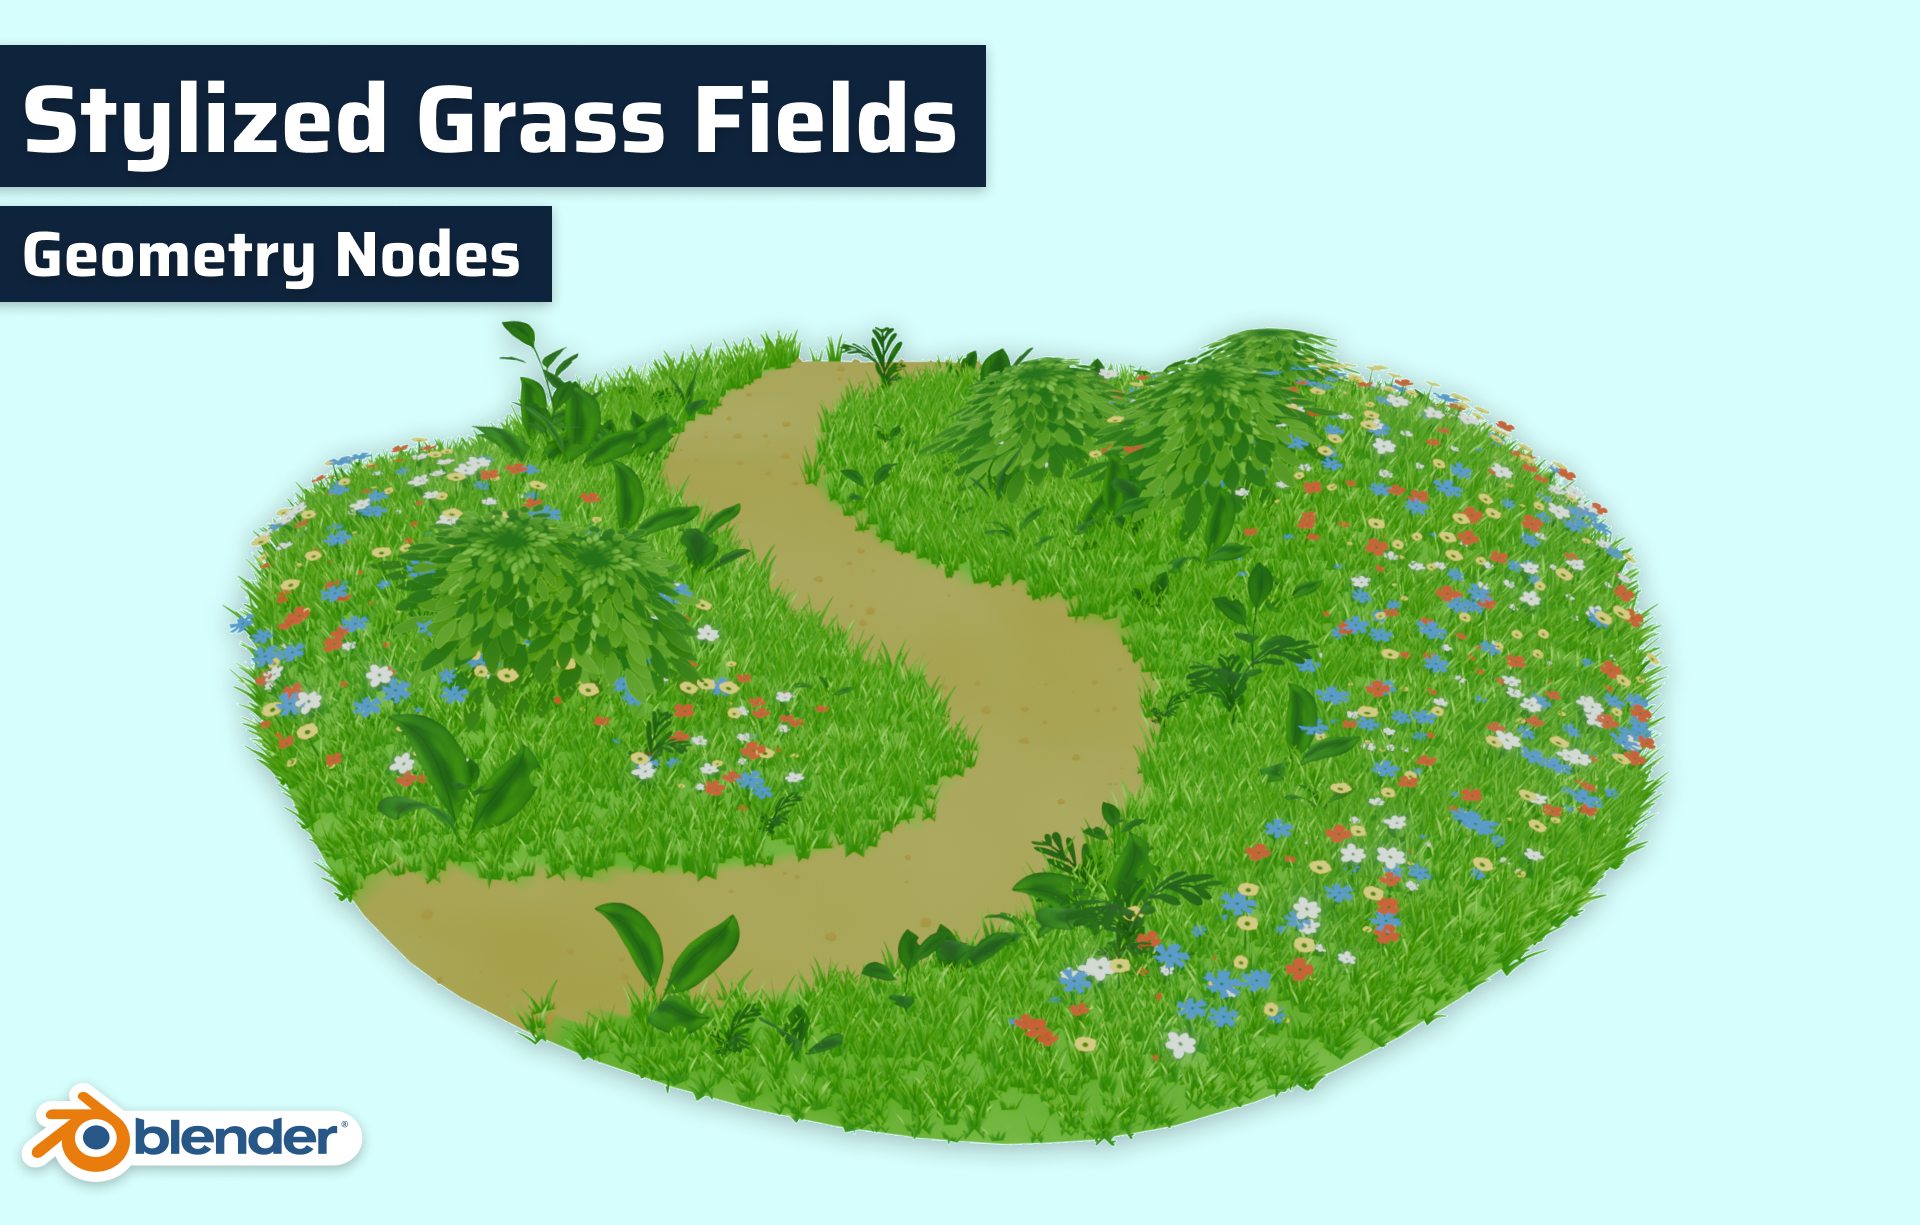 Stylized Grass Fields in Blender with Geometry Nodes